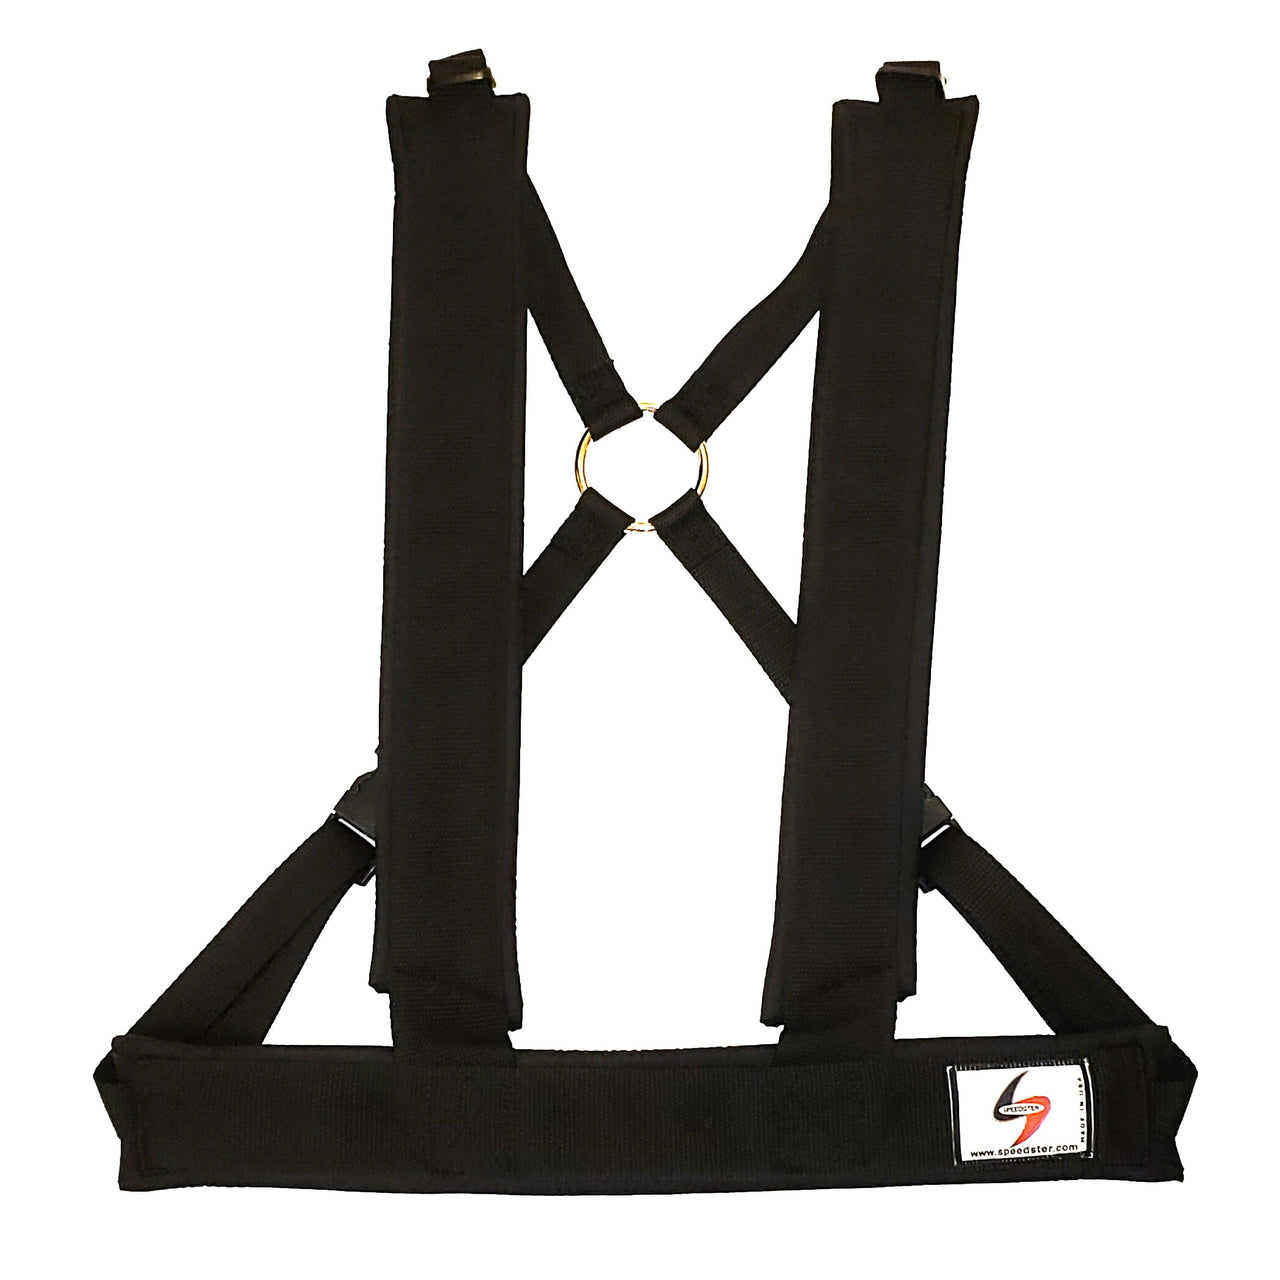 Dual Use Harness™ with Y-Towline